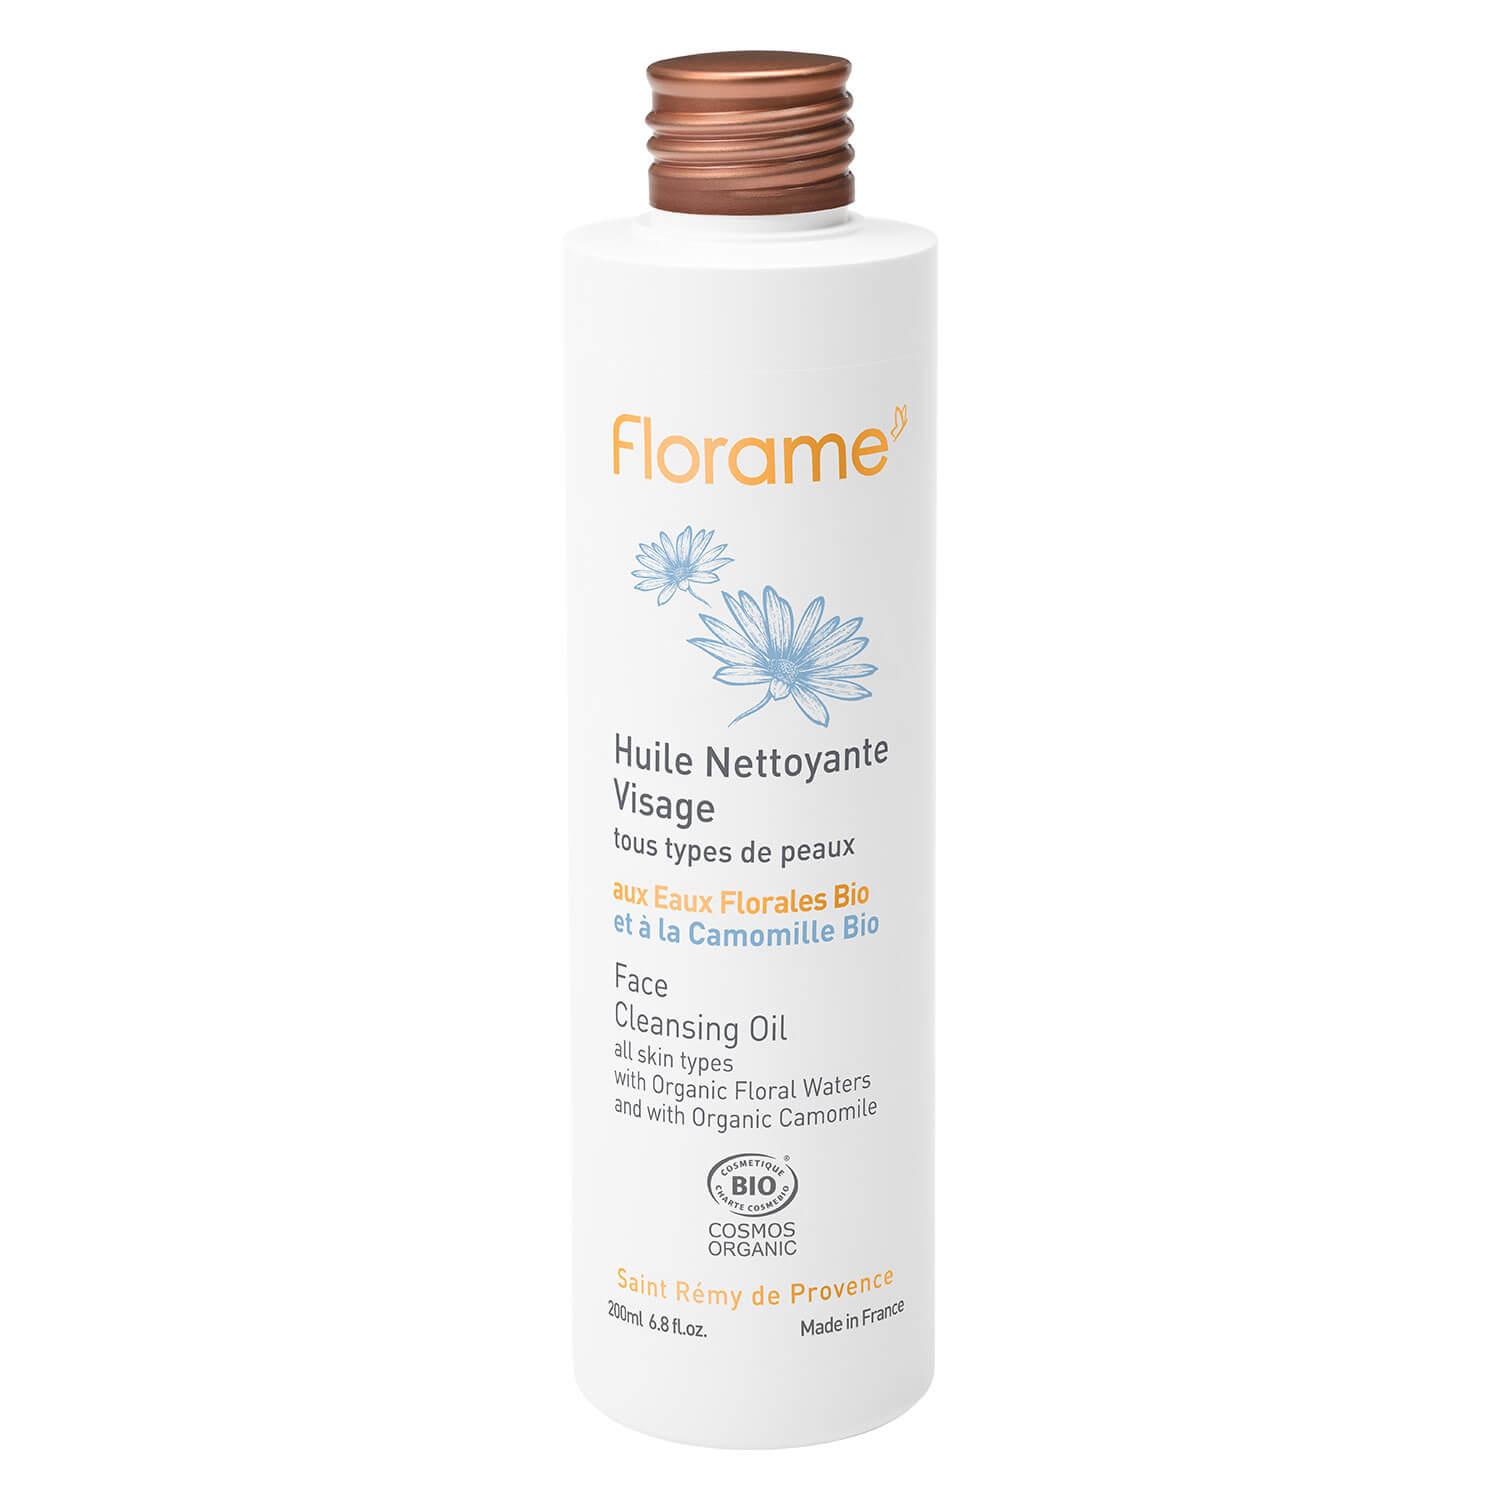 Florame - Face Cleansing Oil